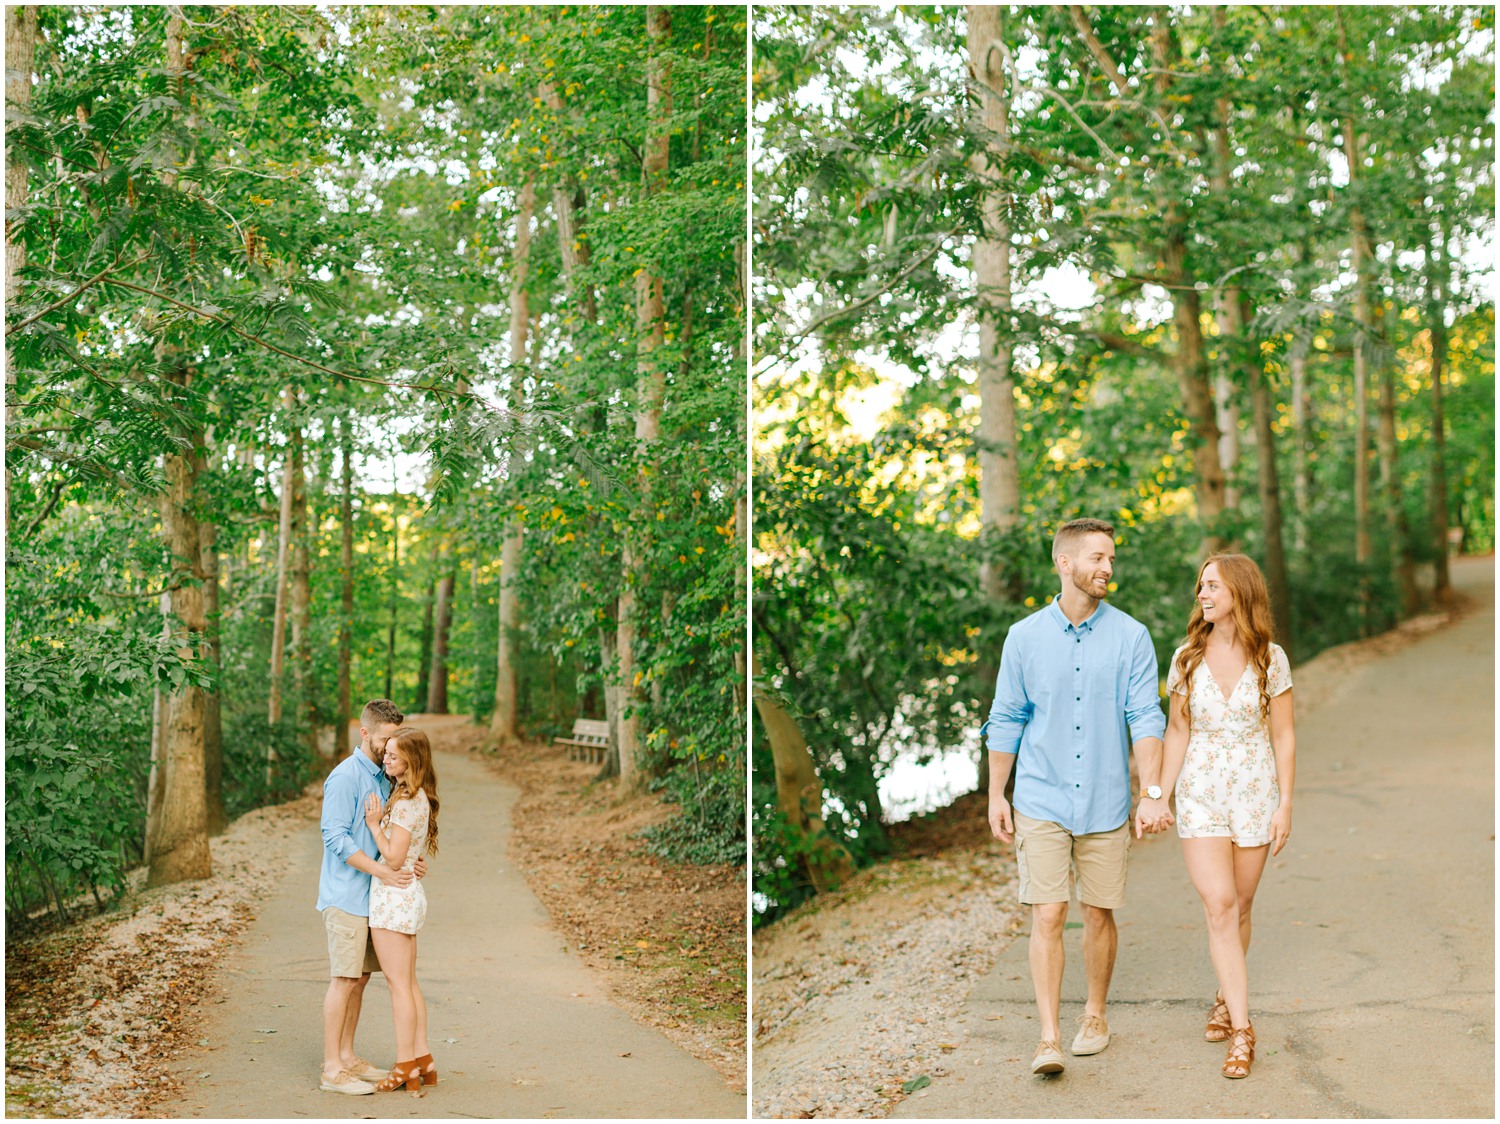 Raleigh couple poses during Lake Lyn engagement photos